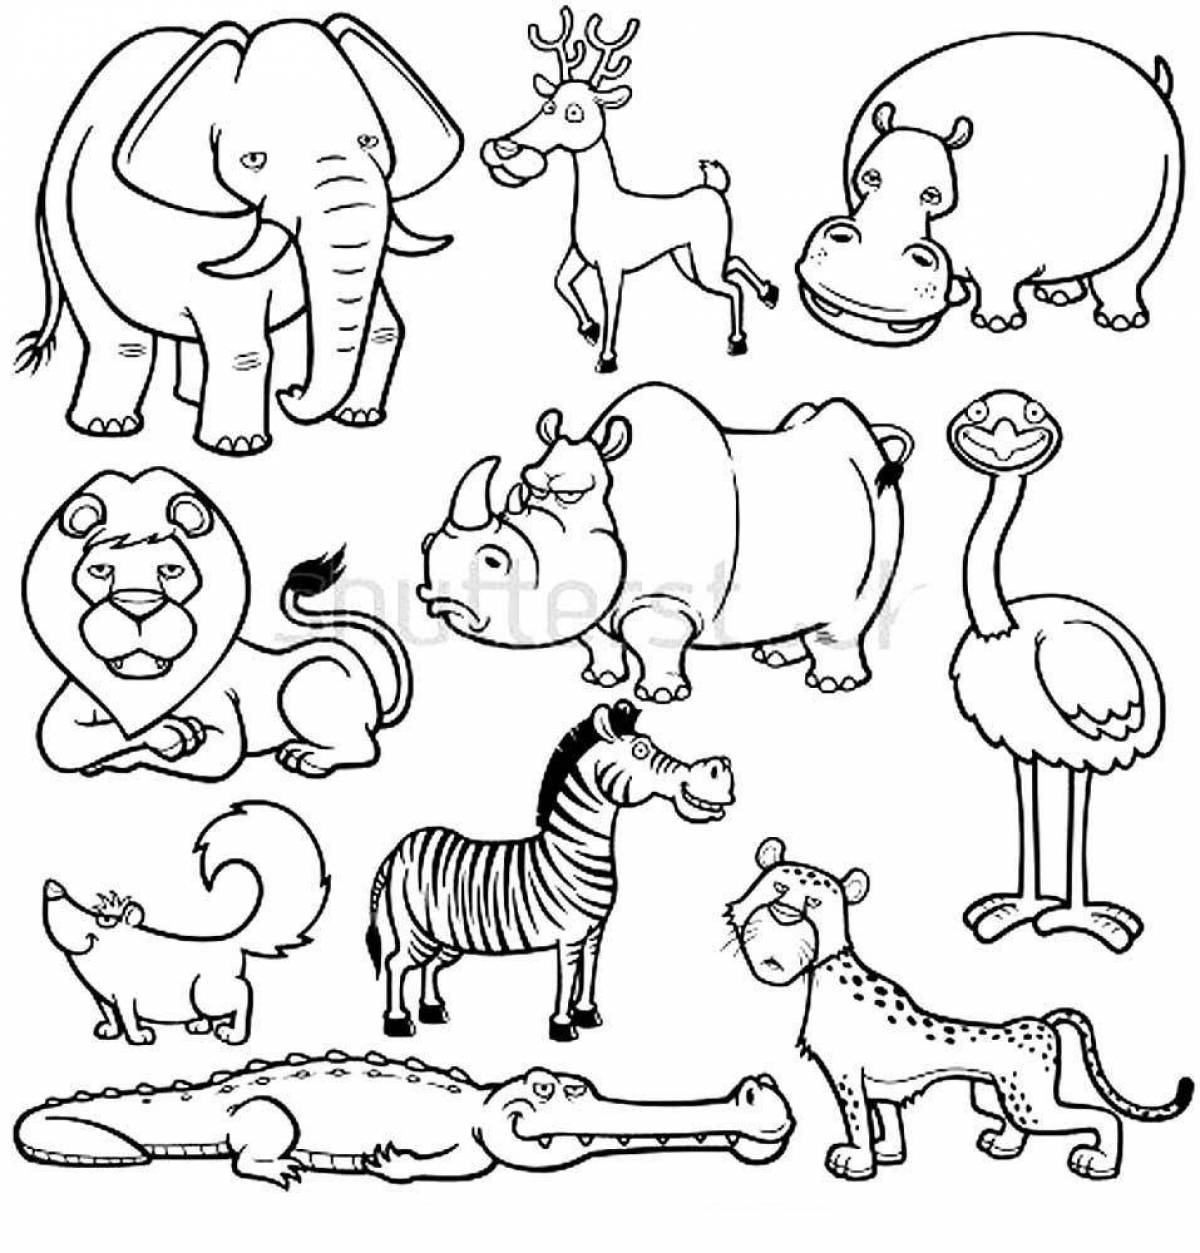 African animals coloring pages for children 5-7 years old